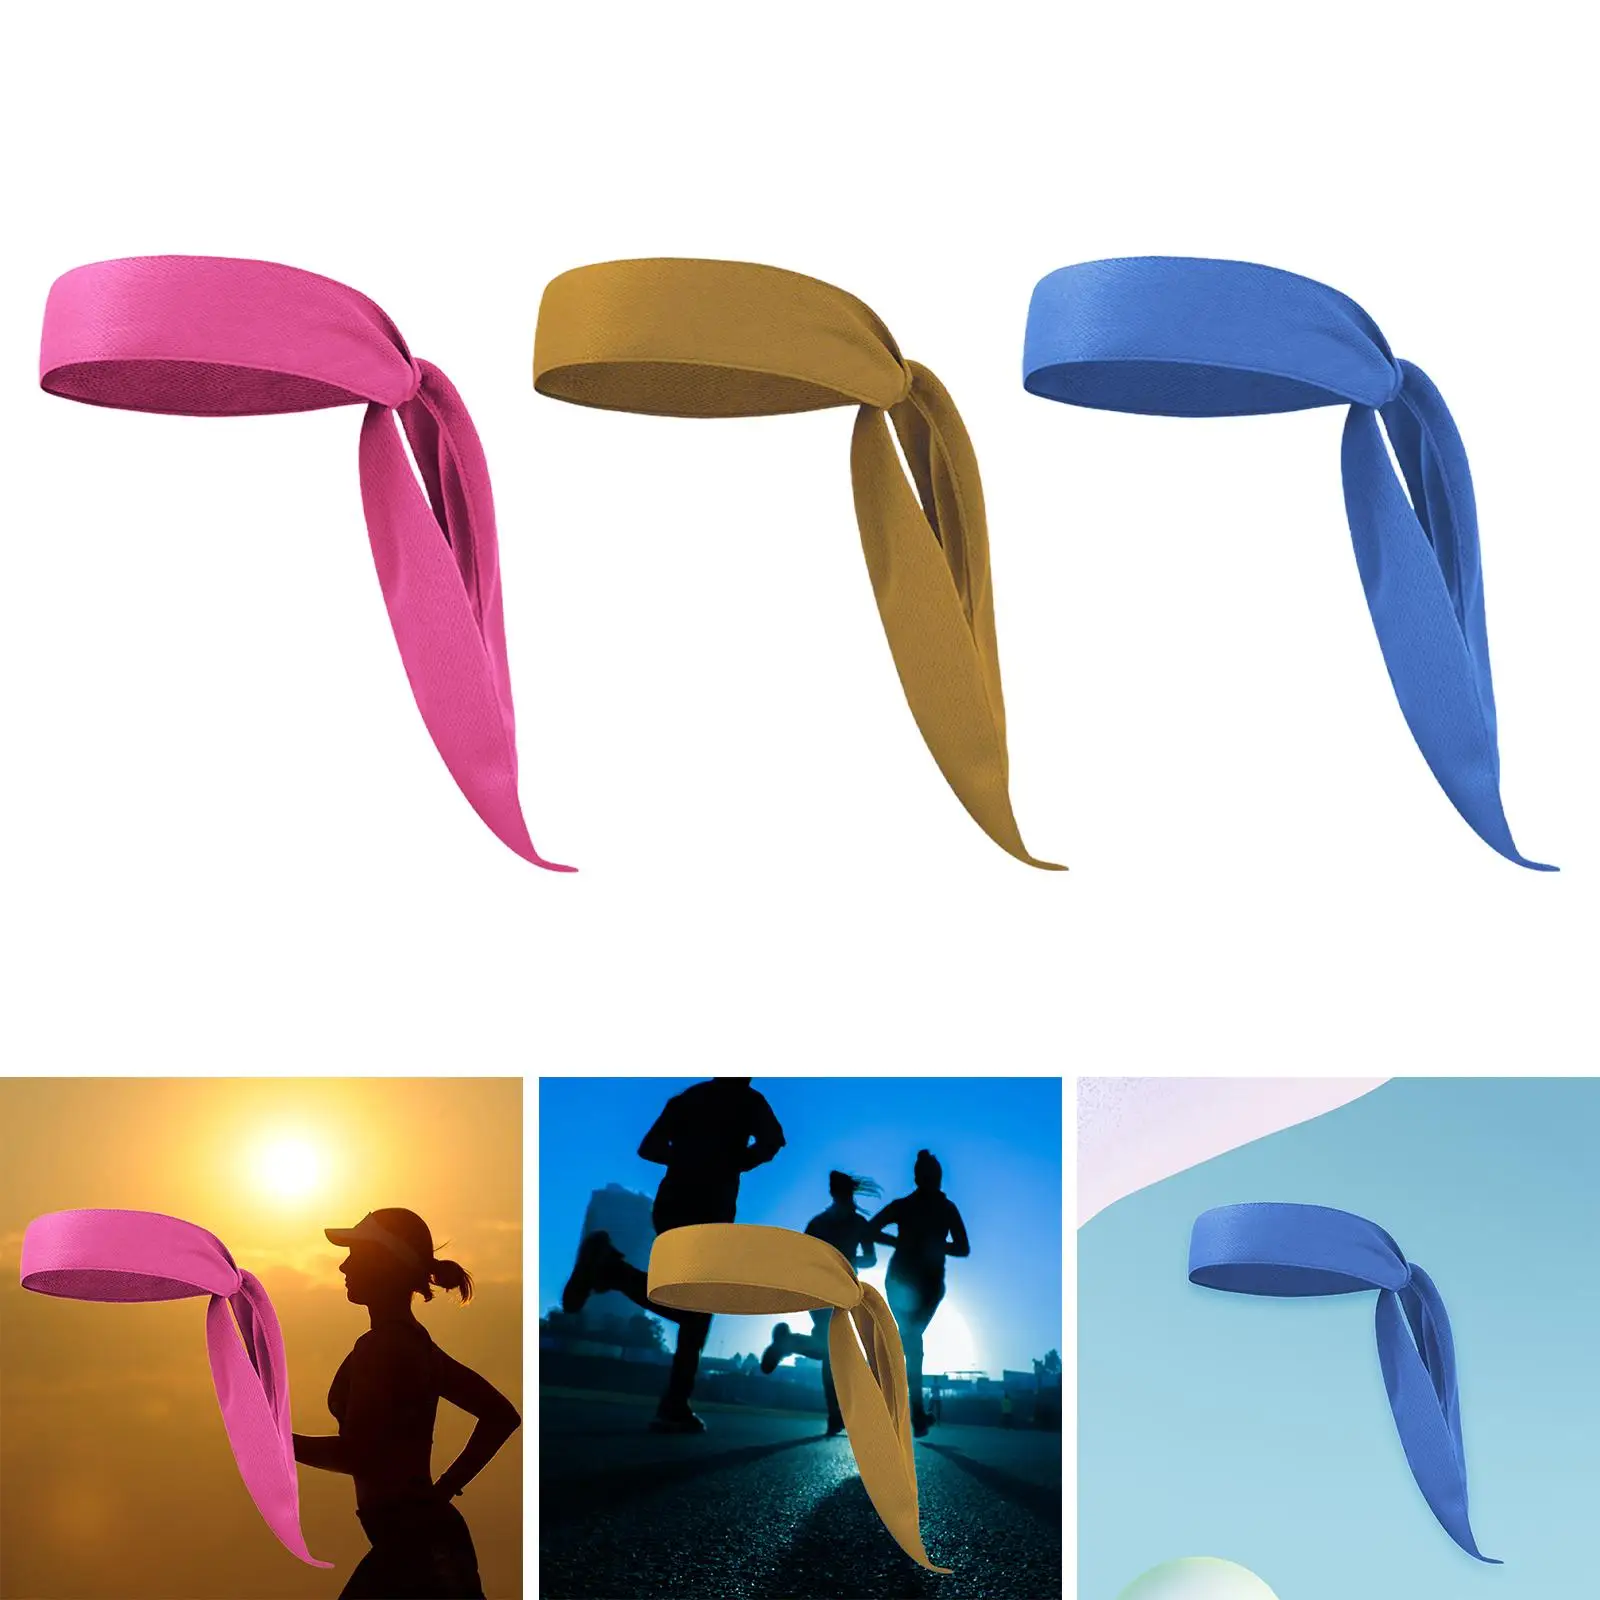 Sports Headband Sweatband Solid Color Nonslip Hair Head Band Tie On Headband for Basketball Working Out Pirate Fitness